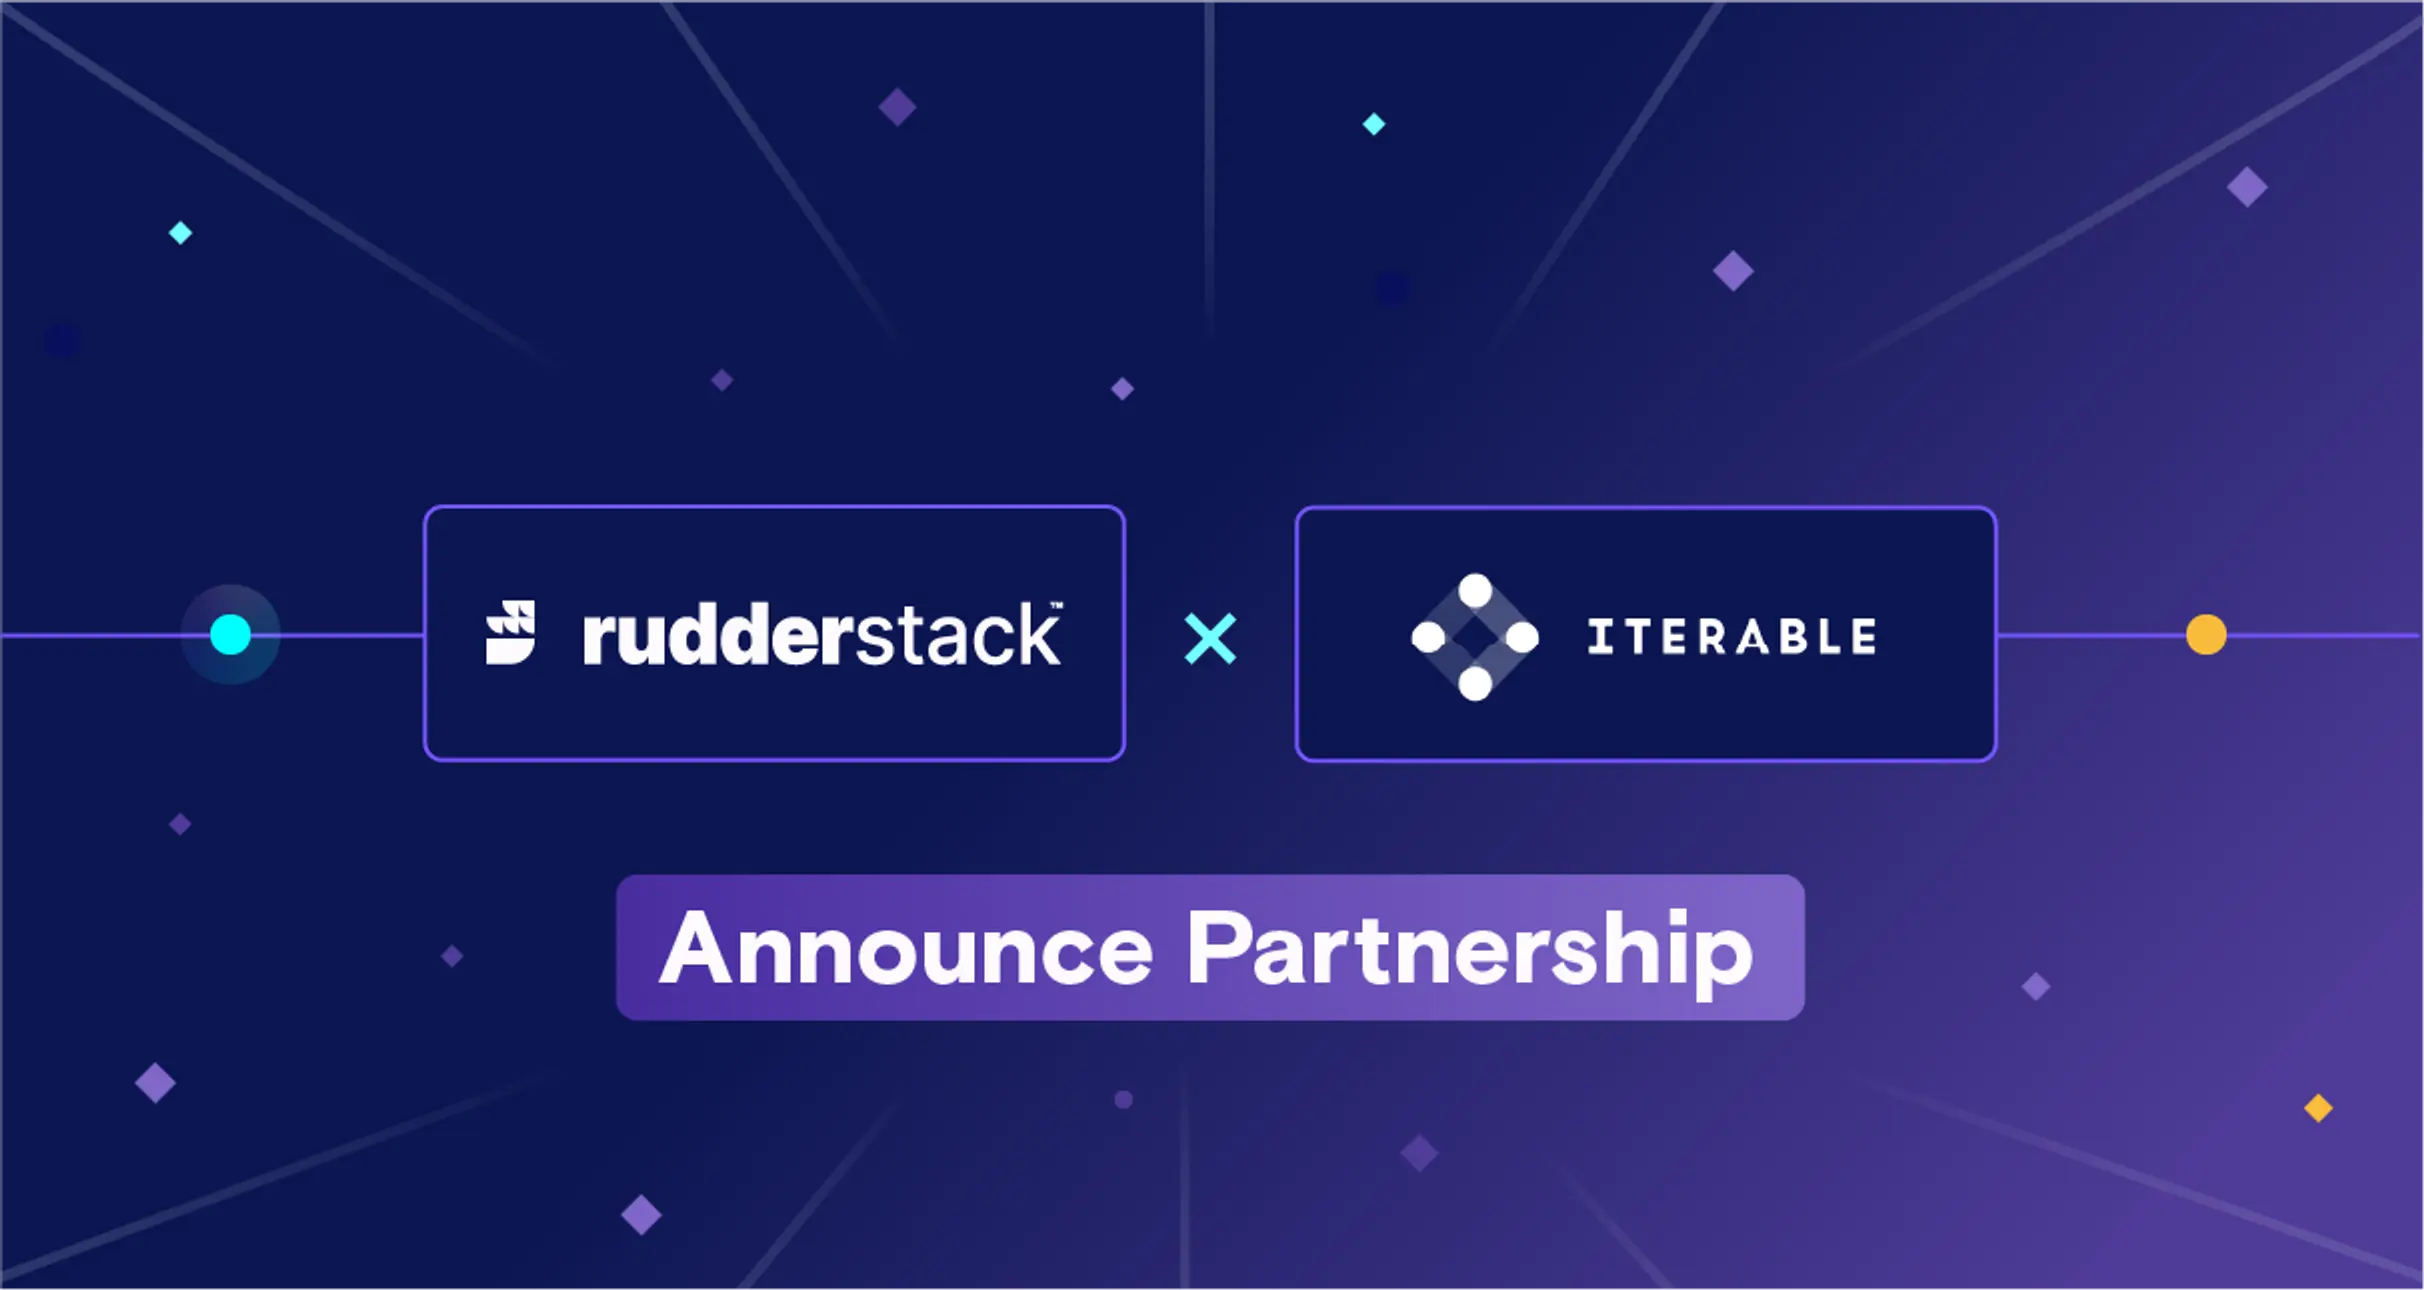 RudderStack and Iterable Enable Deeper Customer Connections 